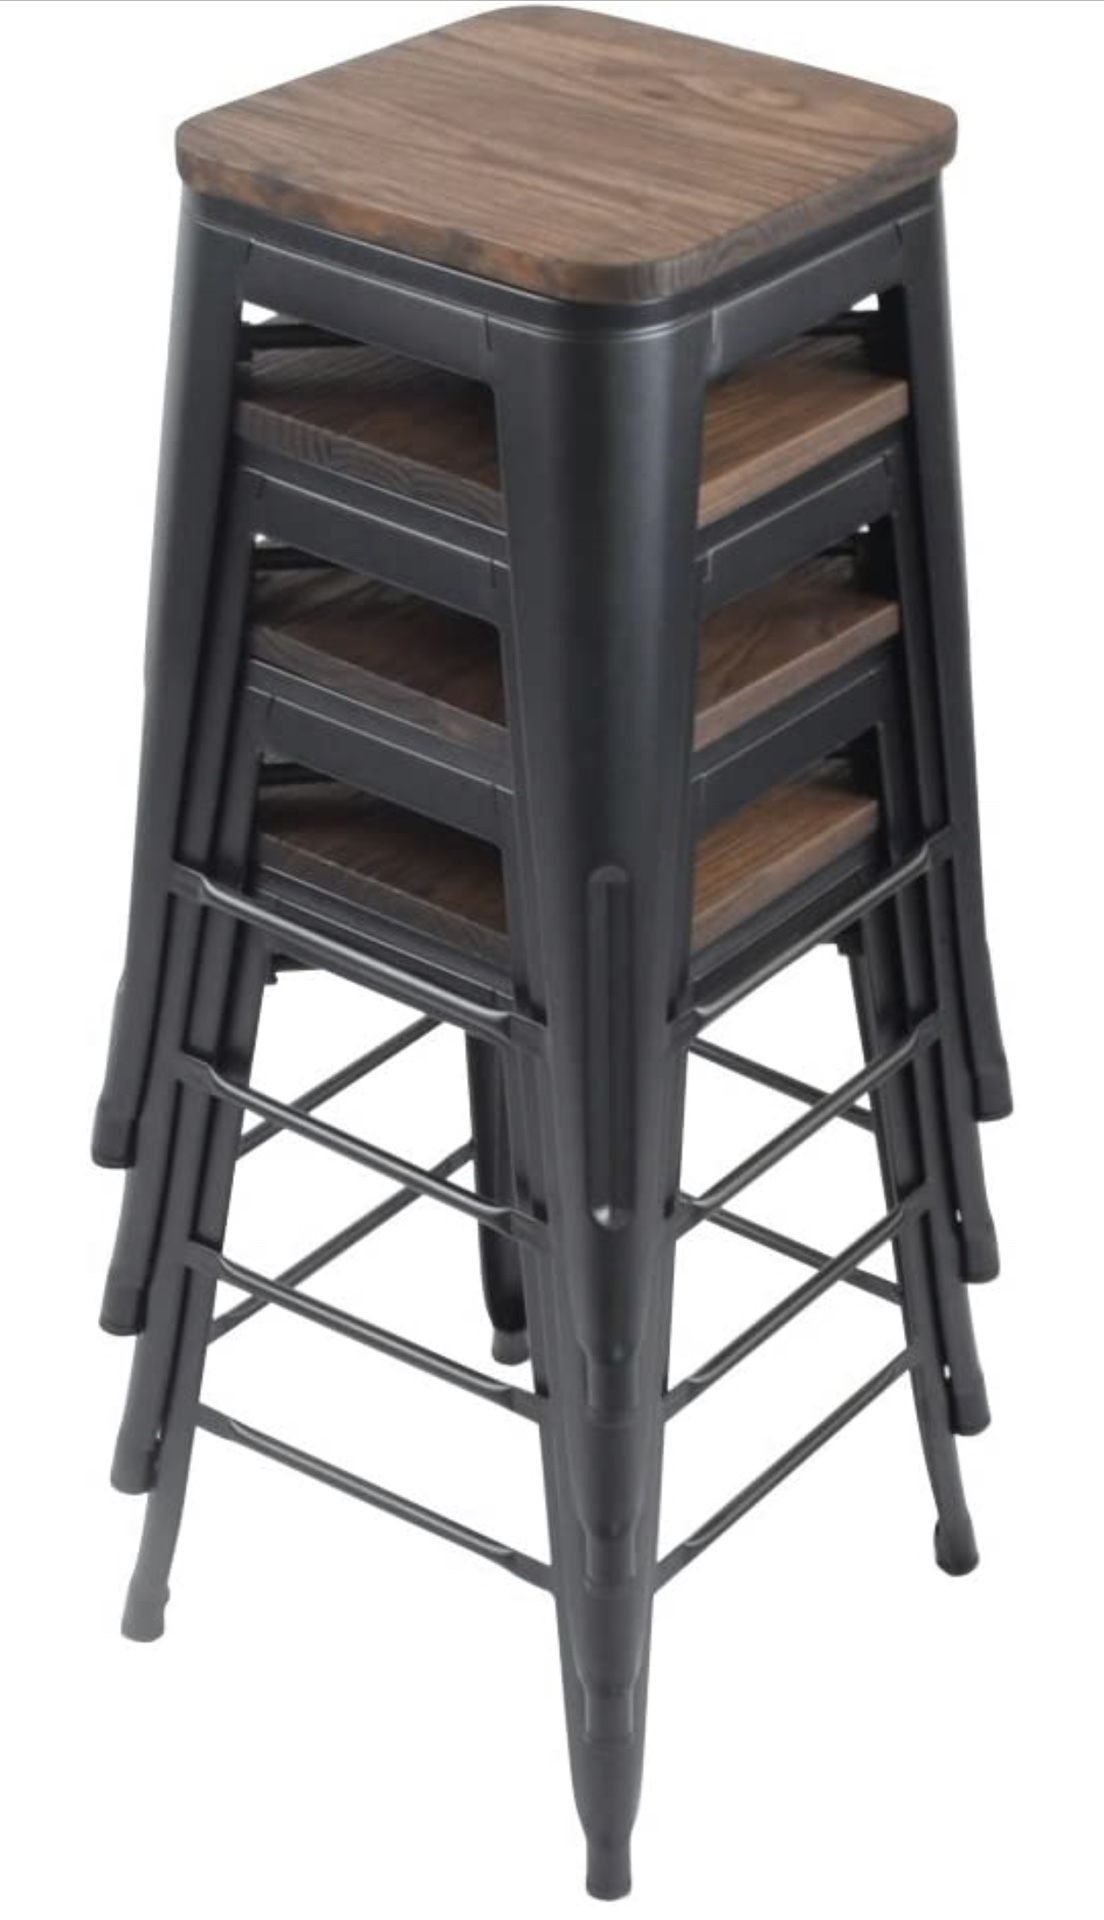 Bar Stools Set of 4 with Wooden Seat Backless Barstools Industrial Counter Height Bar Stools Stackable for Kitchen (26 inch, Matte Black )